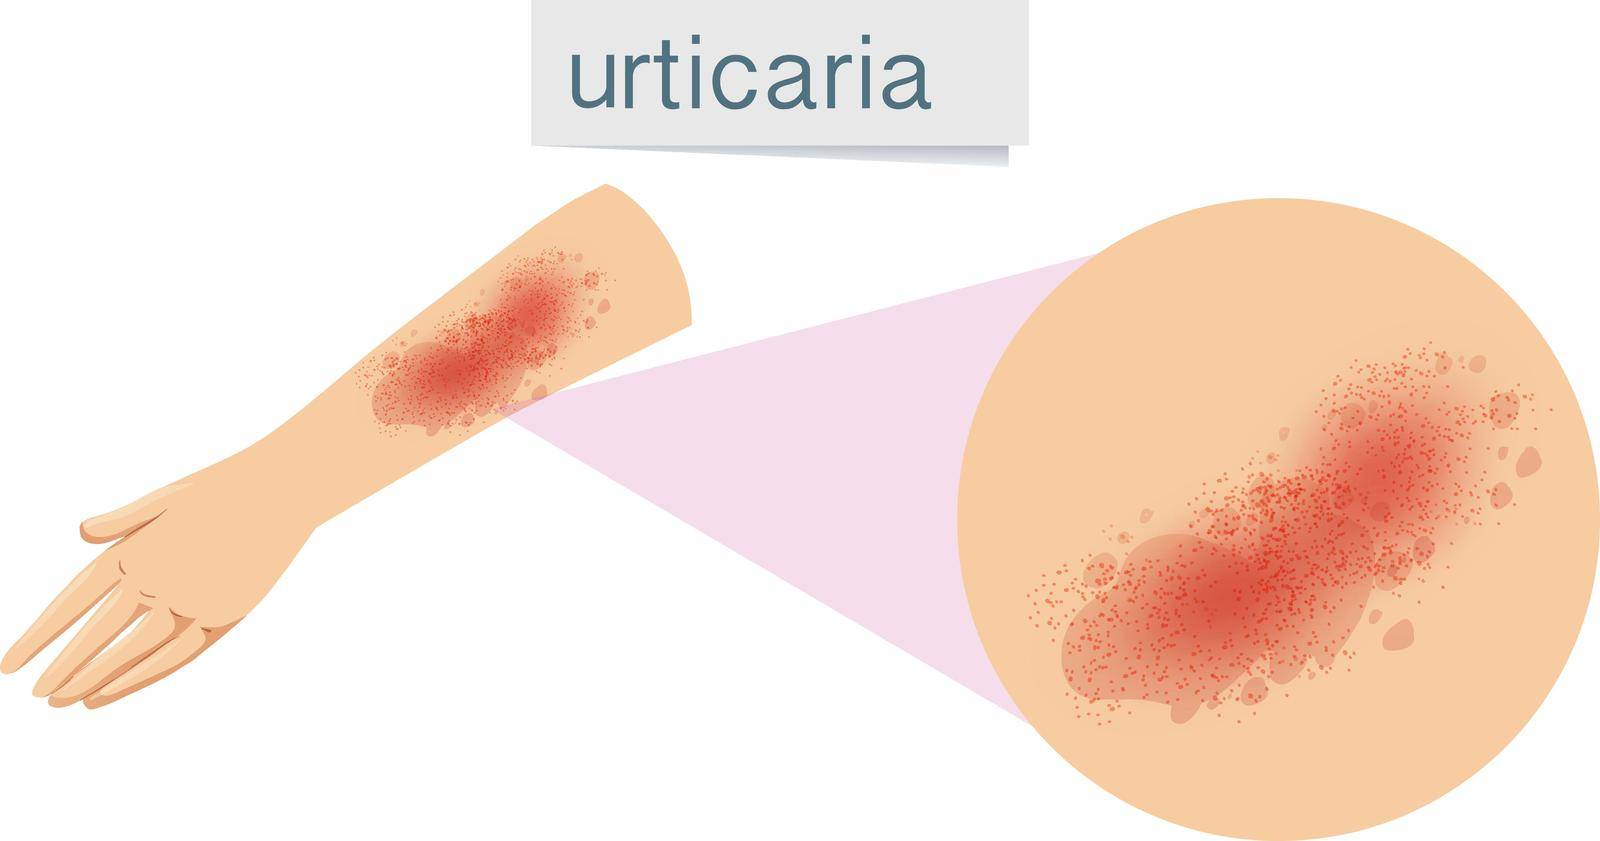 A Human Skin Problem Urticaria by iimages